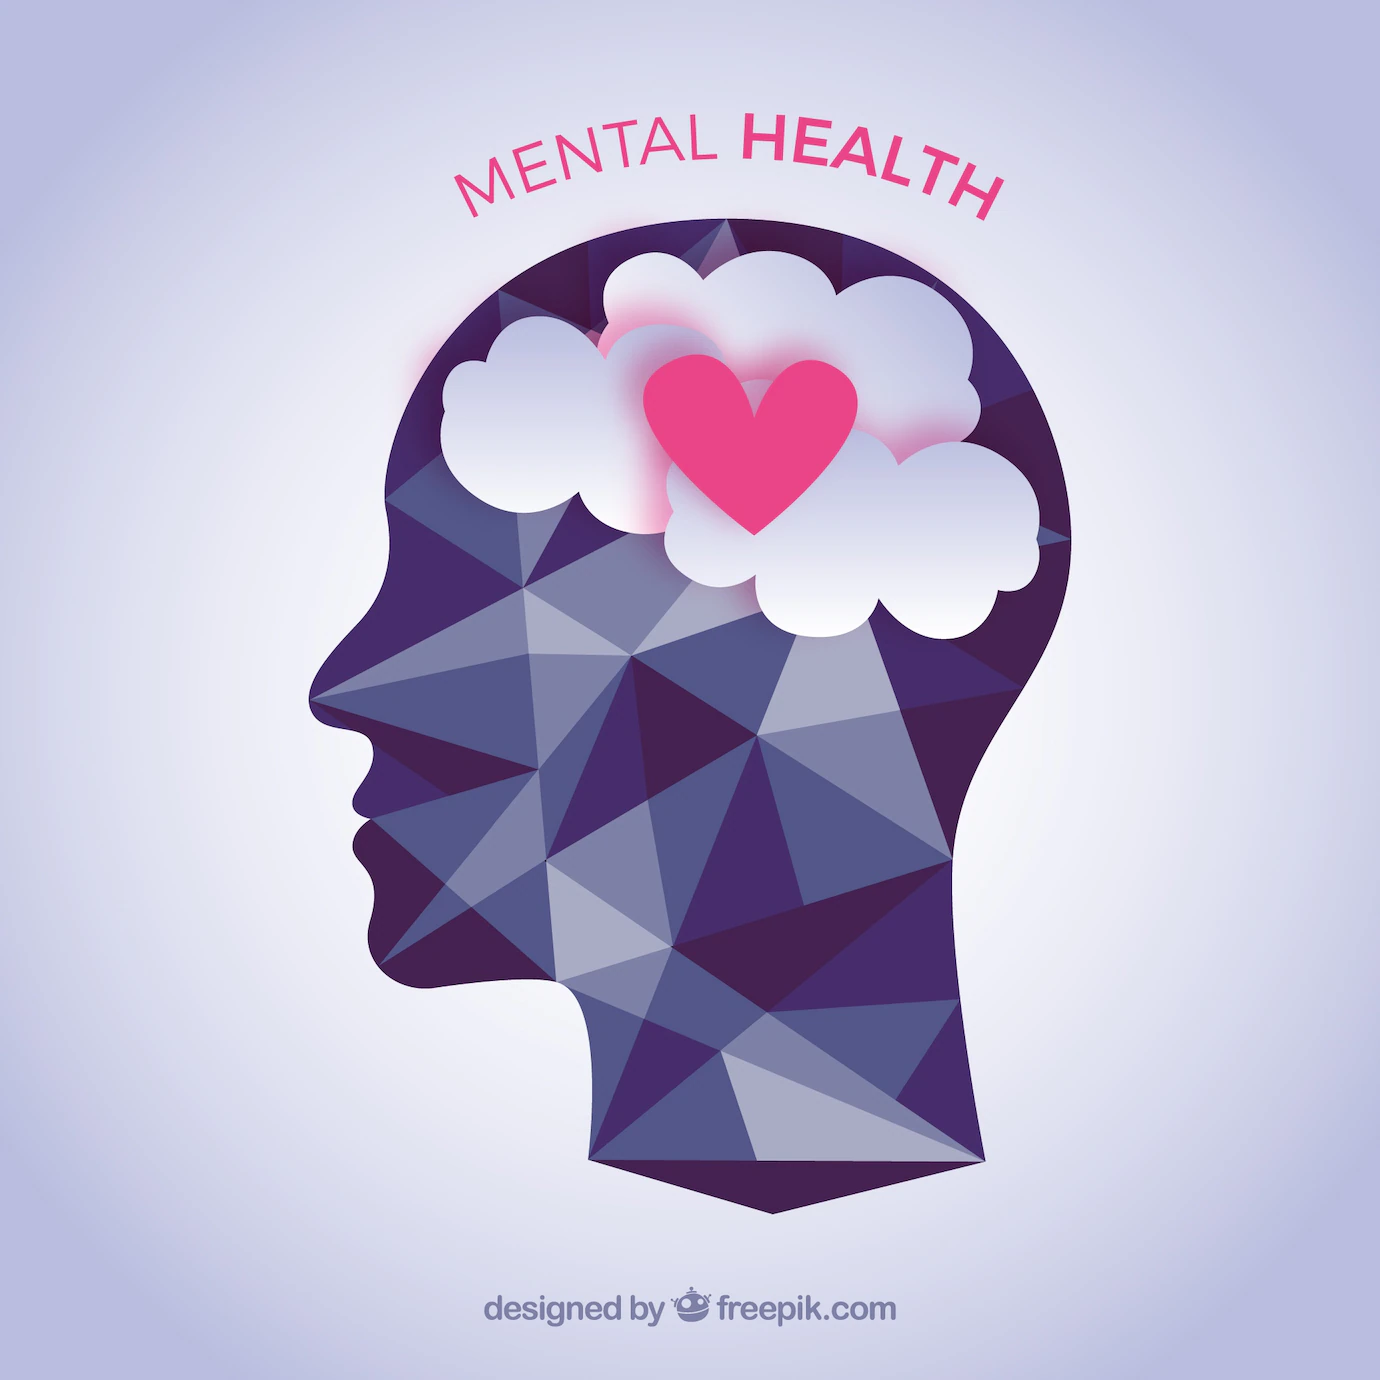 Mental Health Composition With Flat Design 23 2147869820